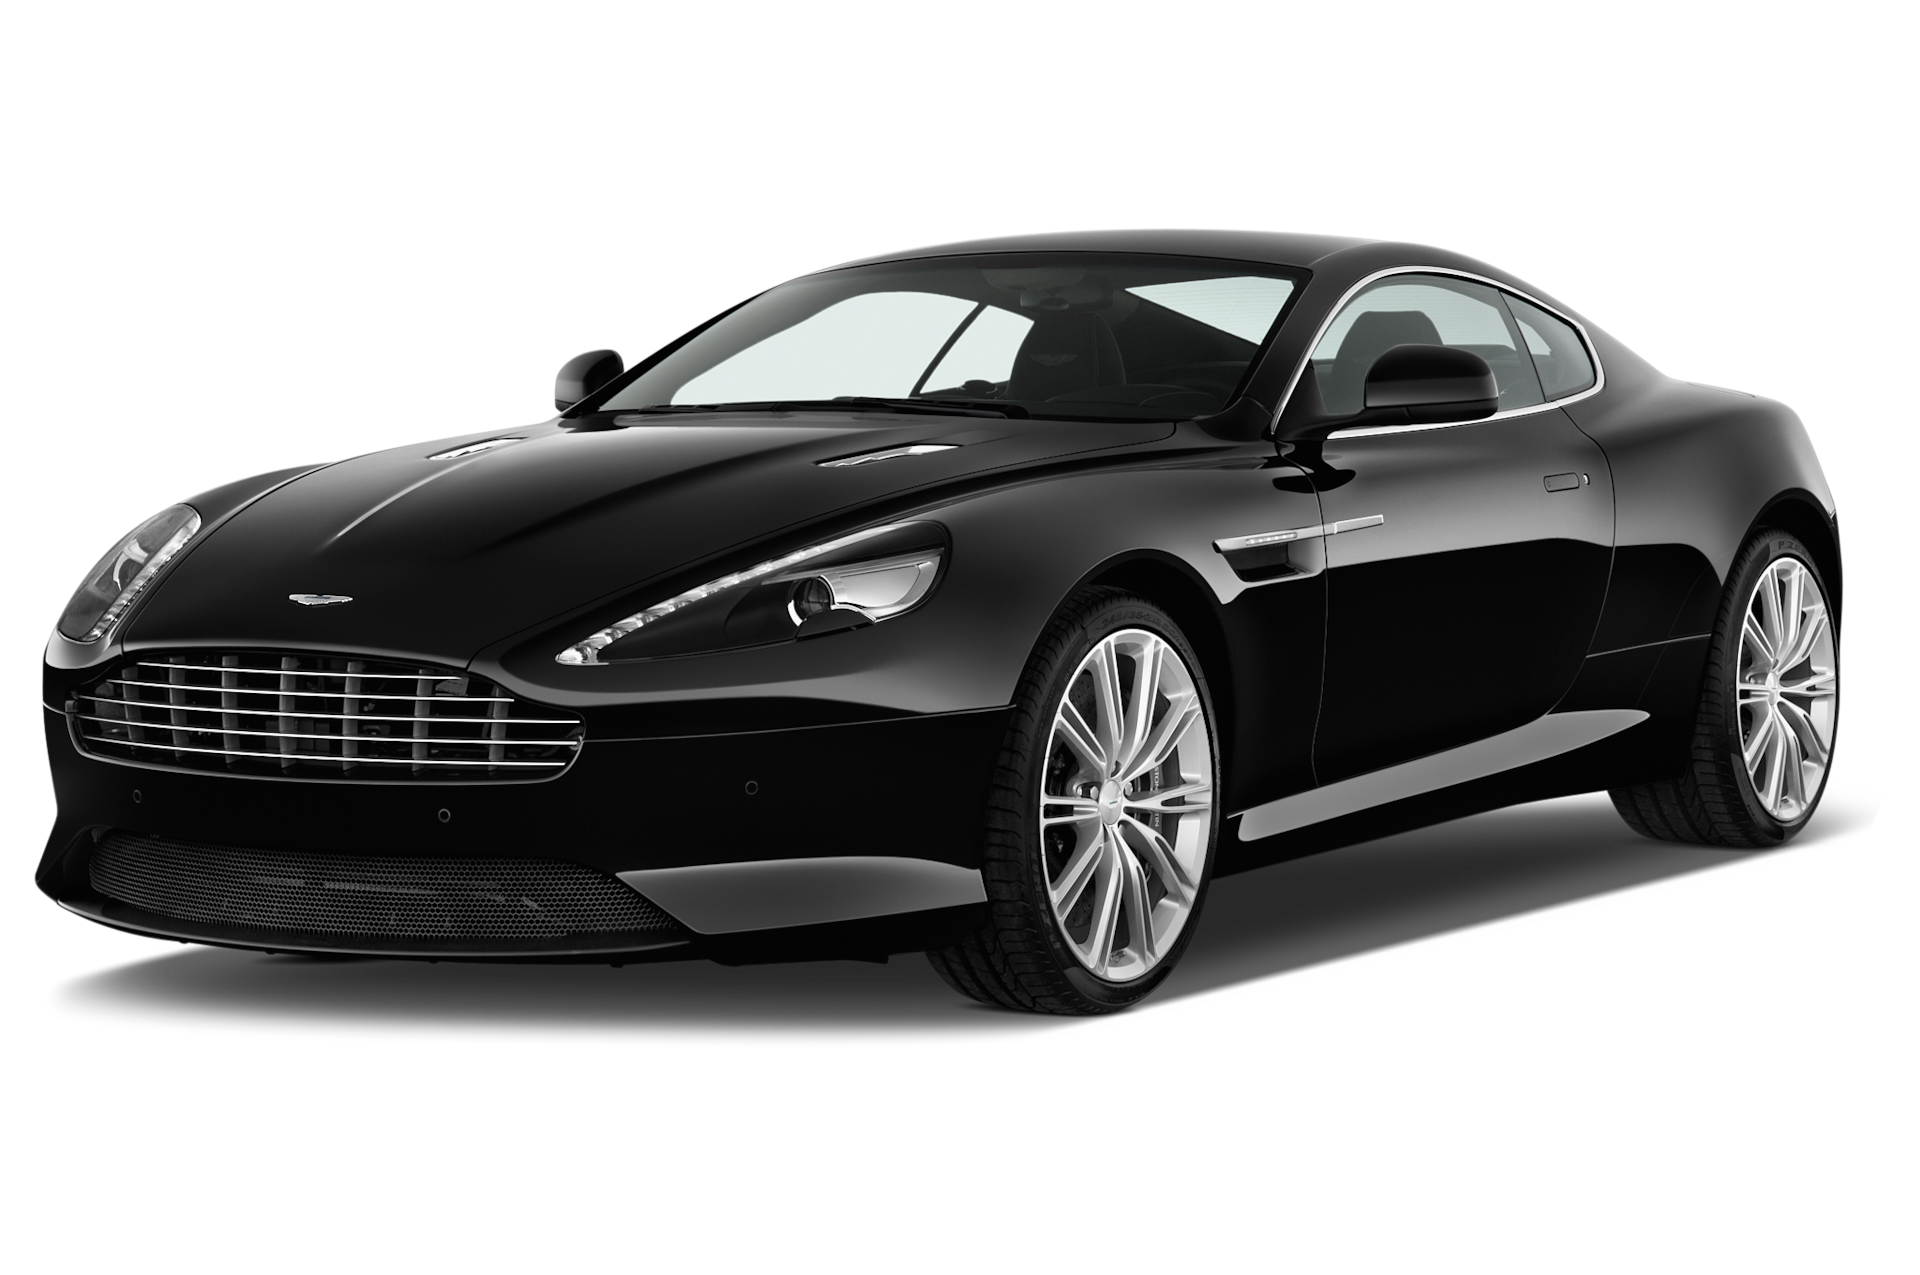 2012 Aston Martin Virage Prices, Reviews, and Photos - MotorTrend